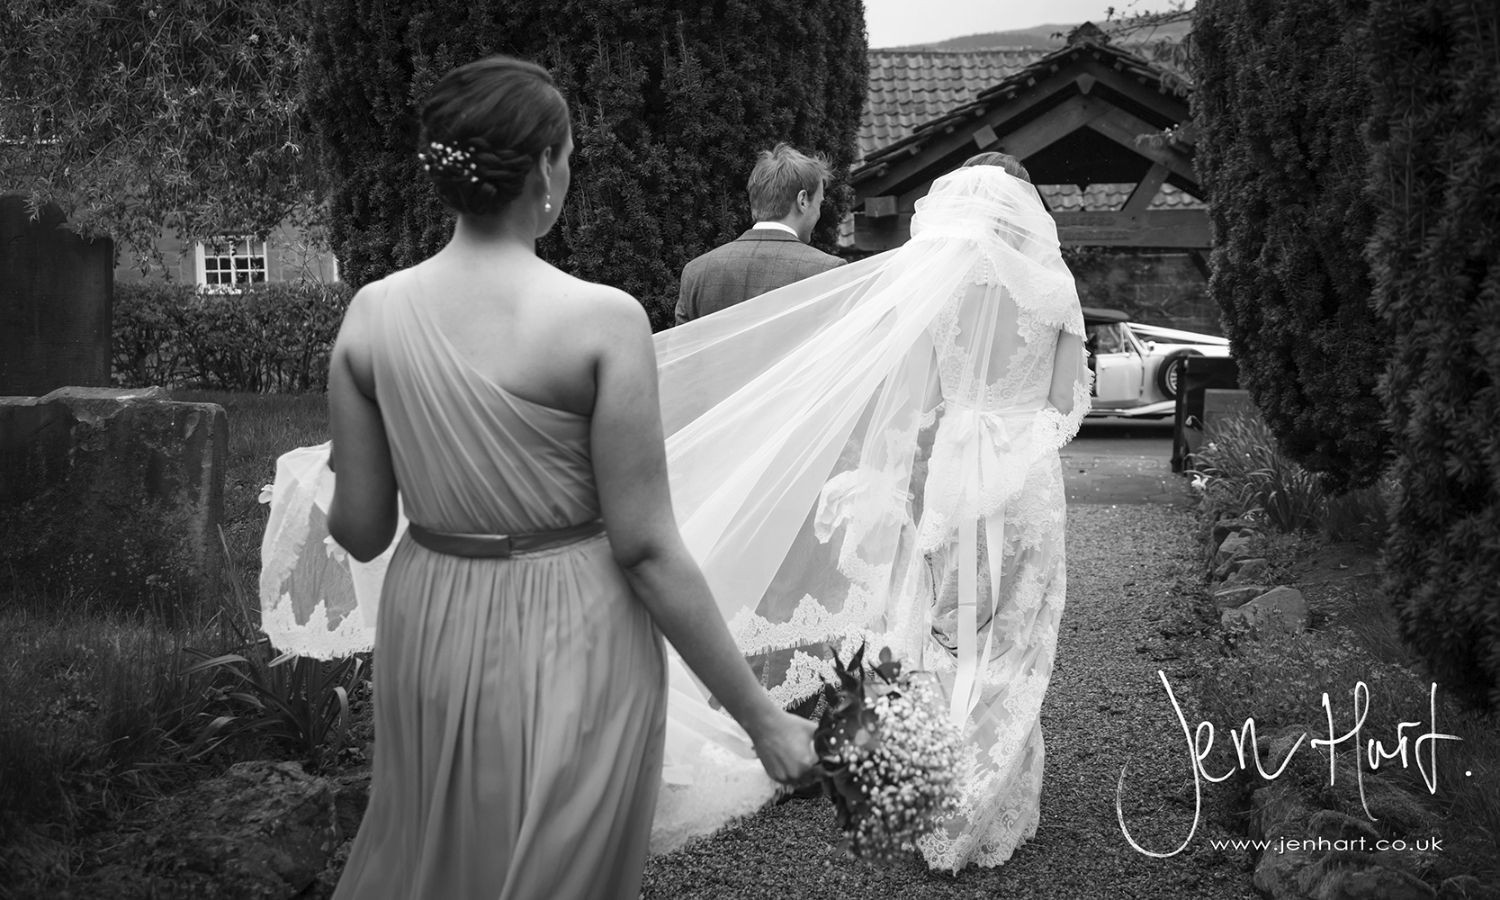 Photograph-Wedding-Whinstone-View_02May15_152